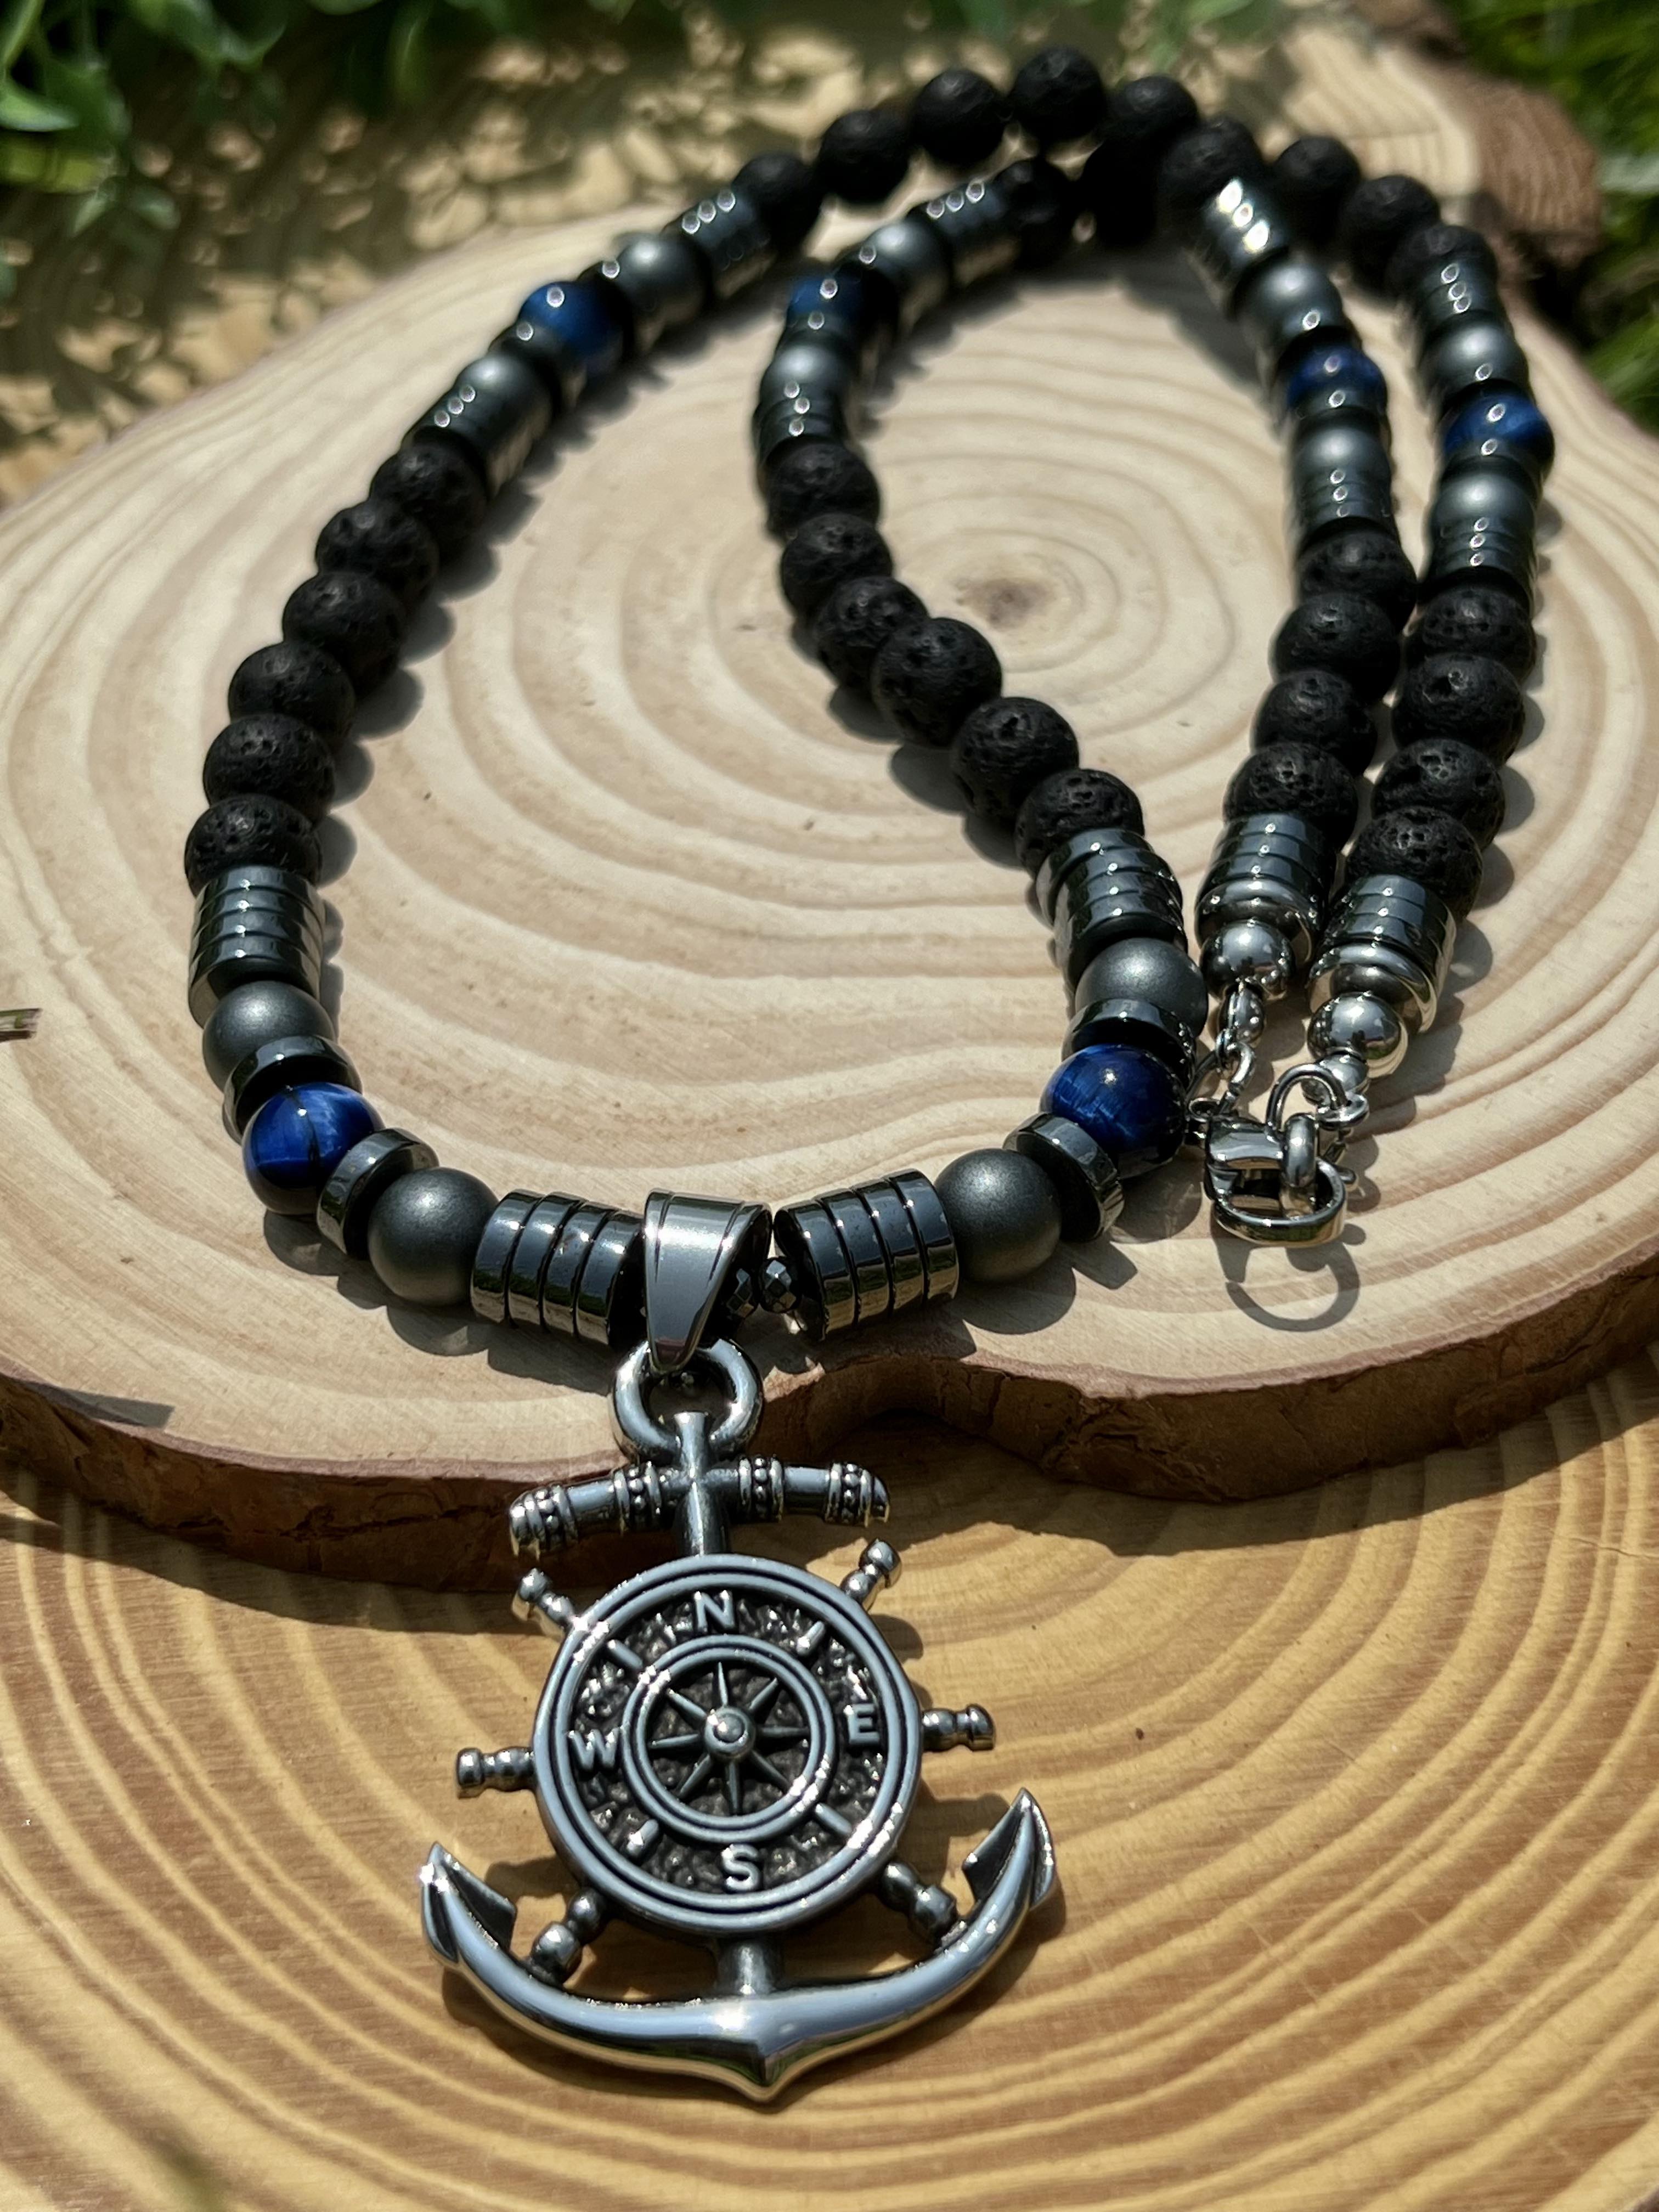 Unlock Your Inner Strength: Hematite, Blue Tiger Eye & Lava Stone Men's Beaded Necklace with Anchor, Helm & Compass Stainless Steel Pendant